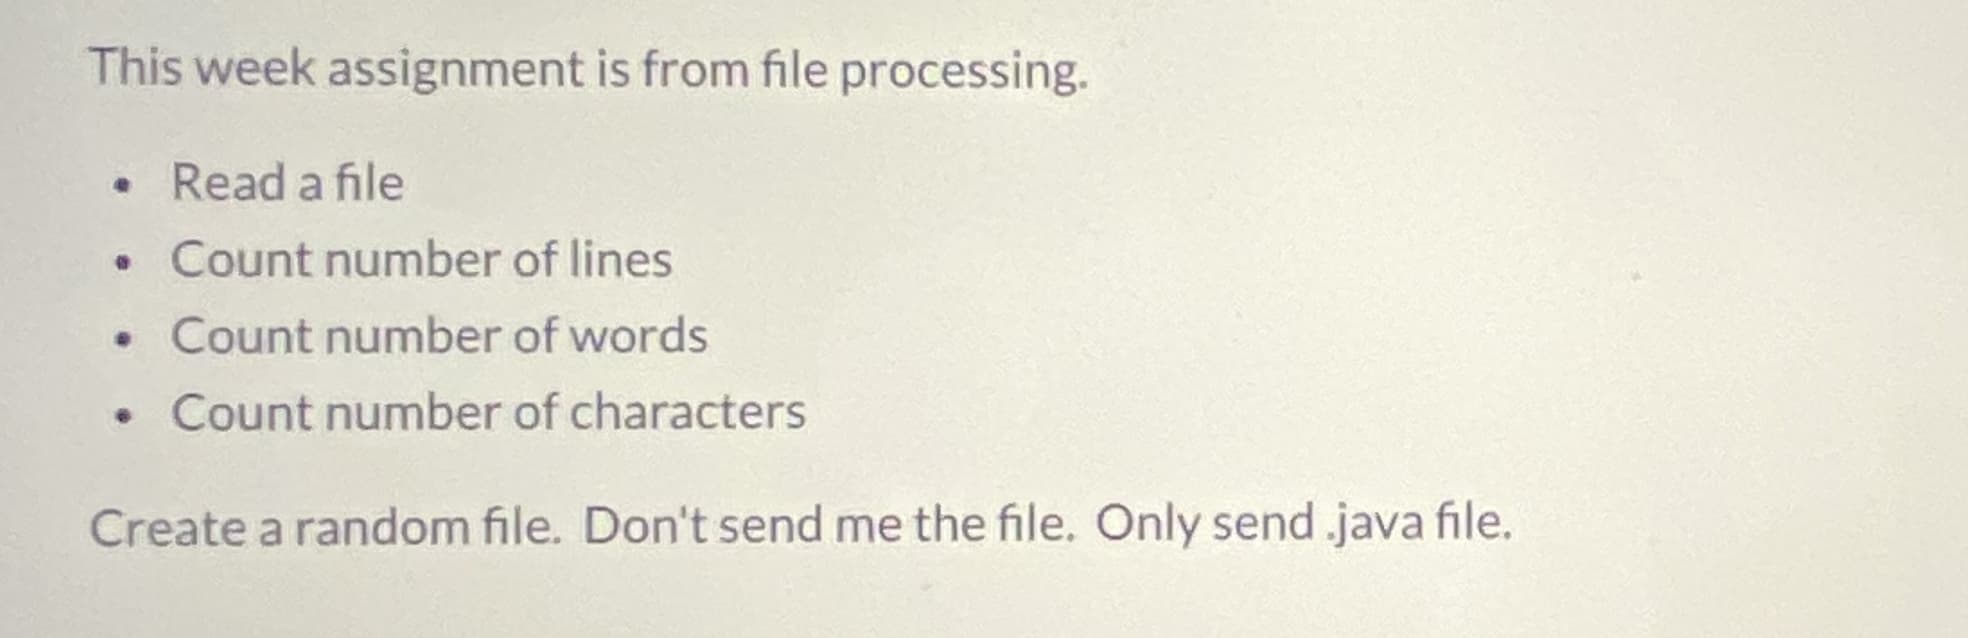 This week assignment is from file processing.
• Read a file
Count number of lines
• Count number of words
• Count number of characters
Create a random file. Don't send me the file. Only send .java file.
